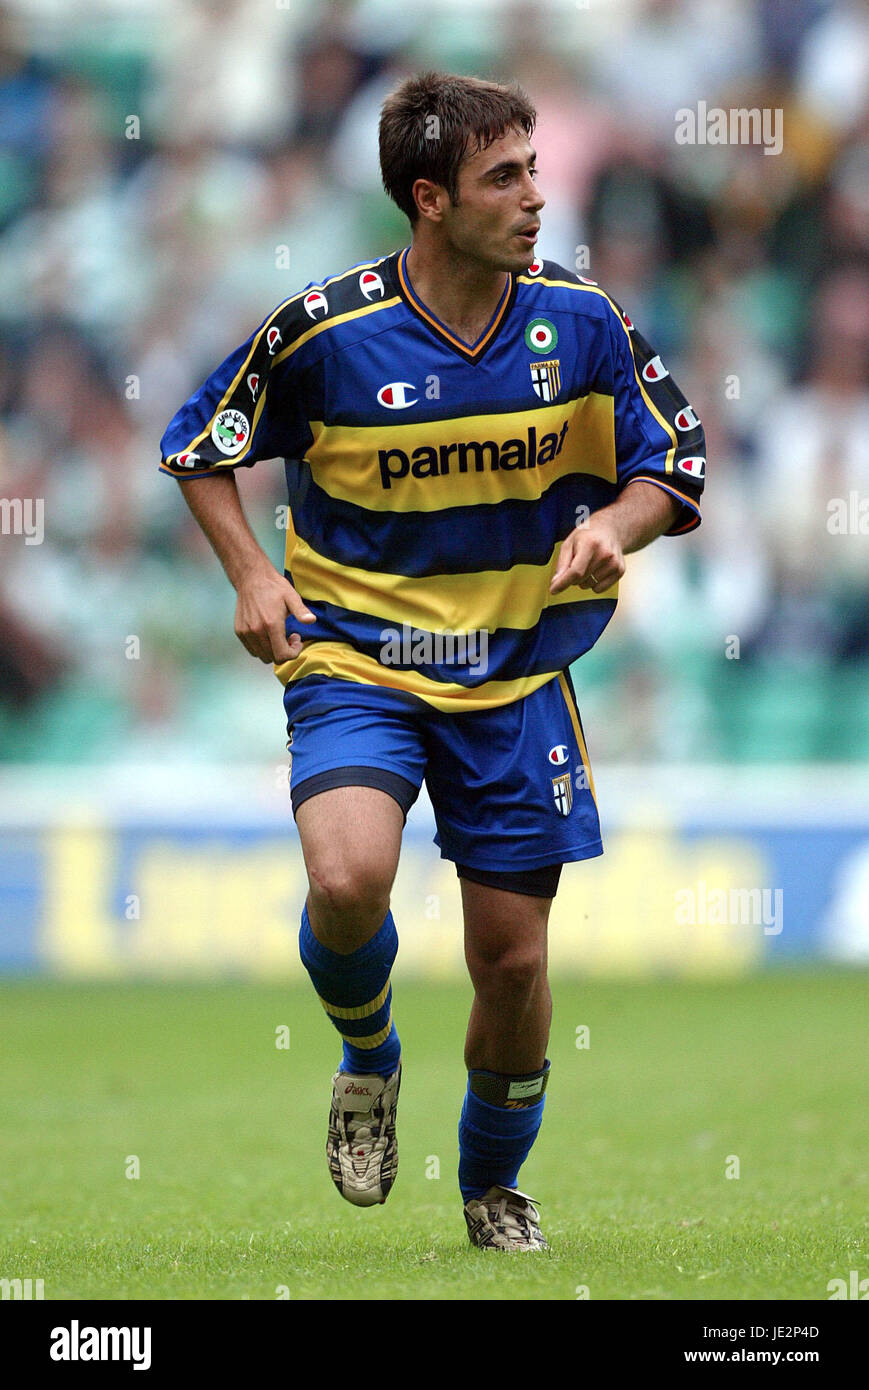 MARCO MARCHIONNI PARMA FC 27 July 2002 Stock Photo